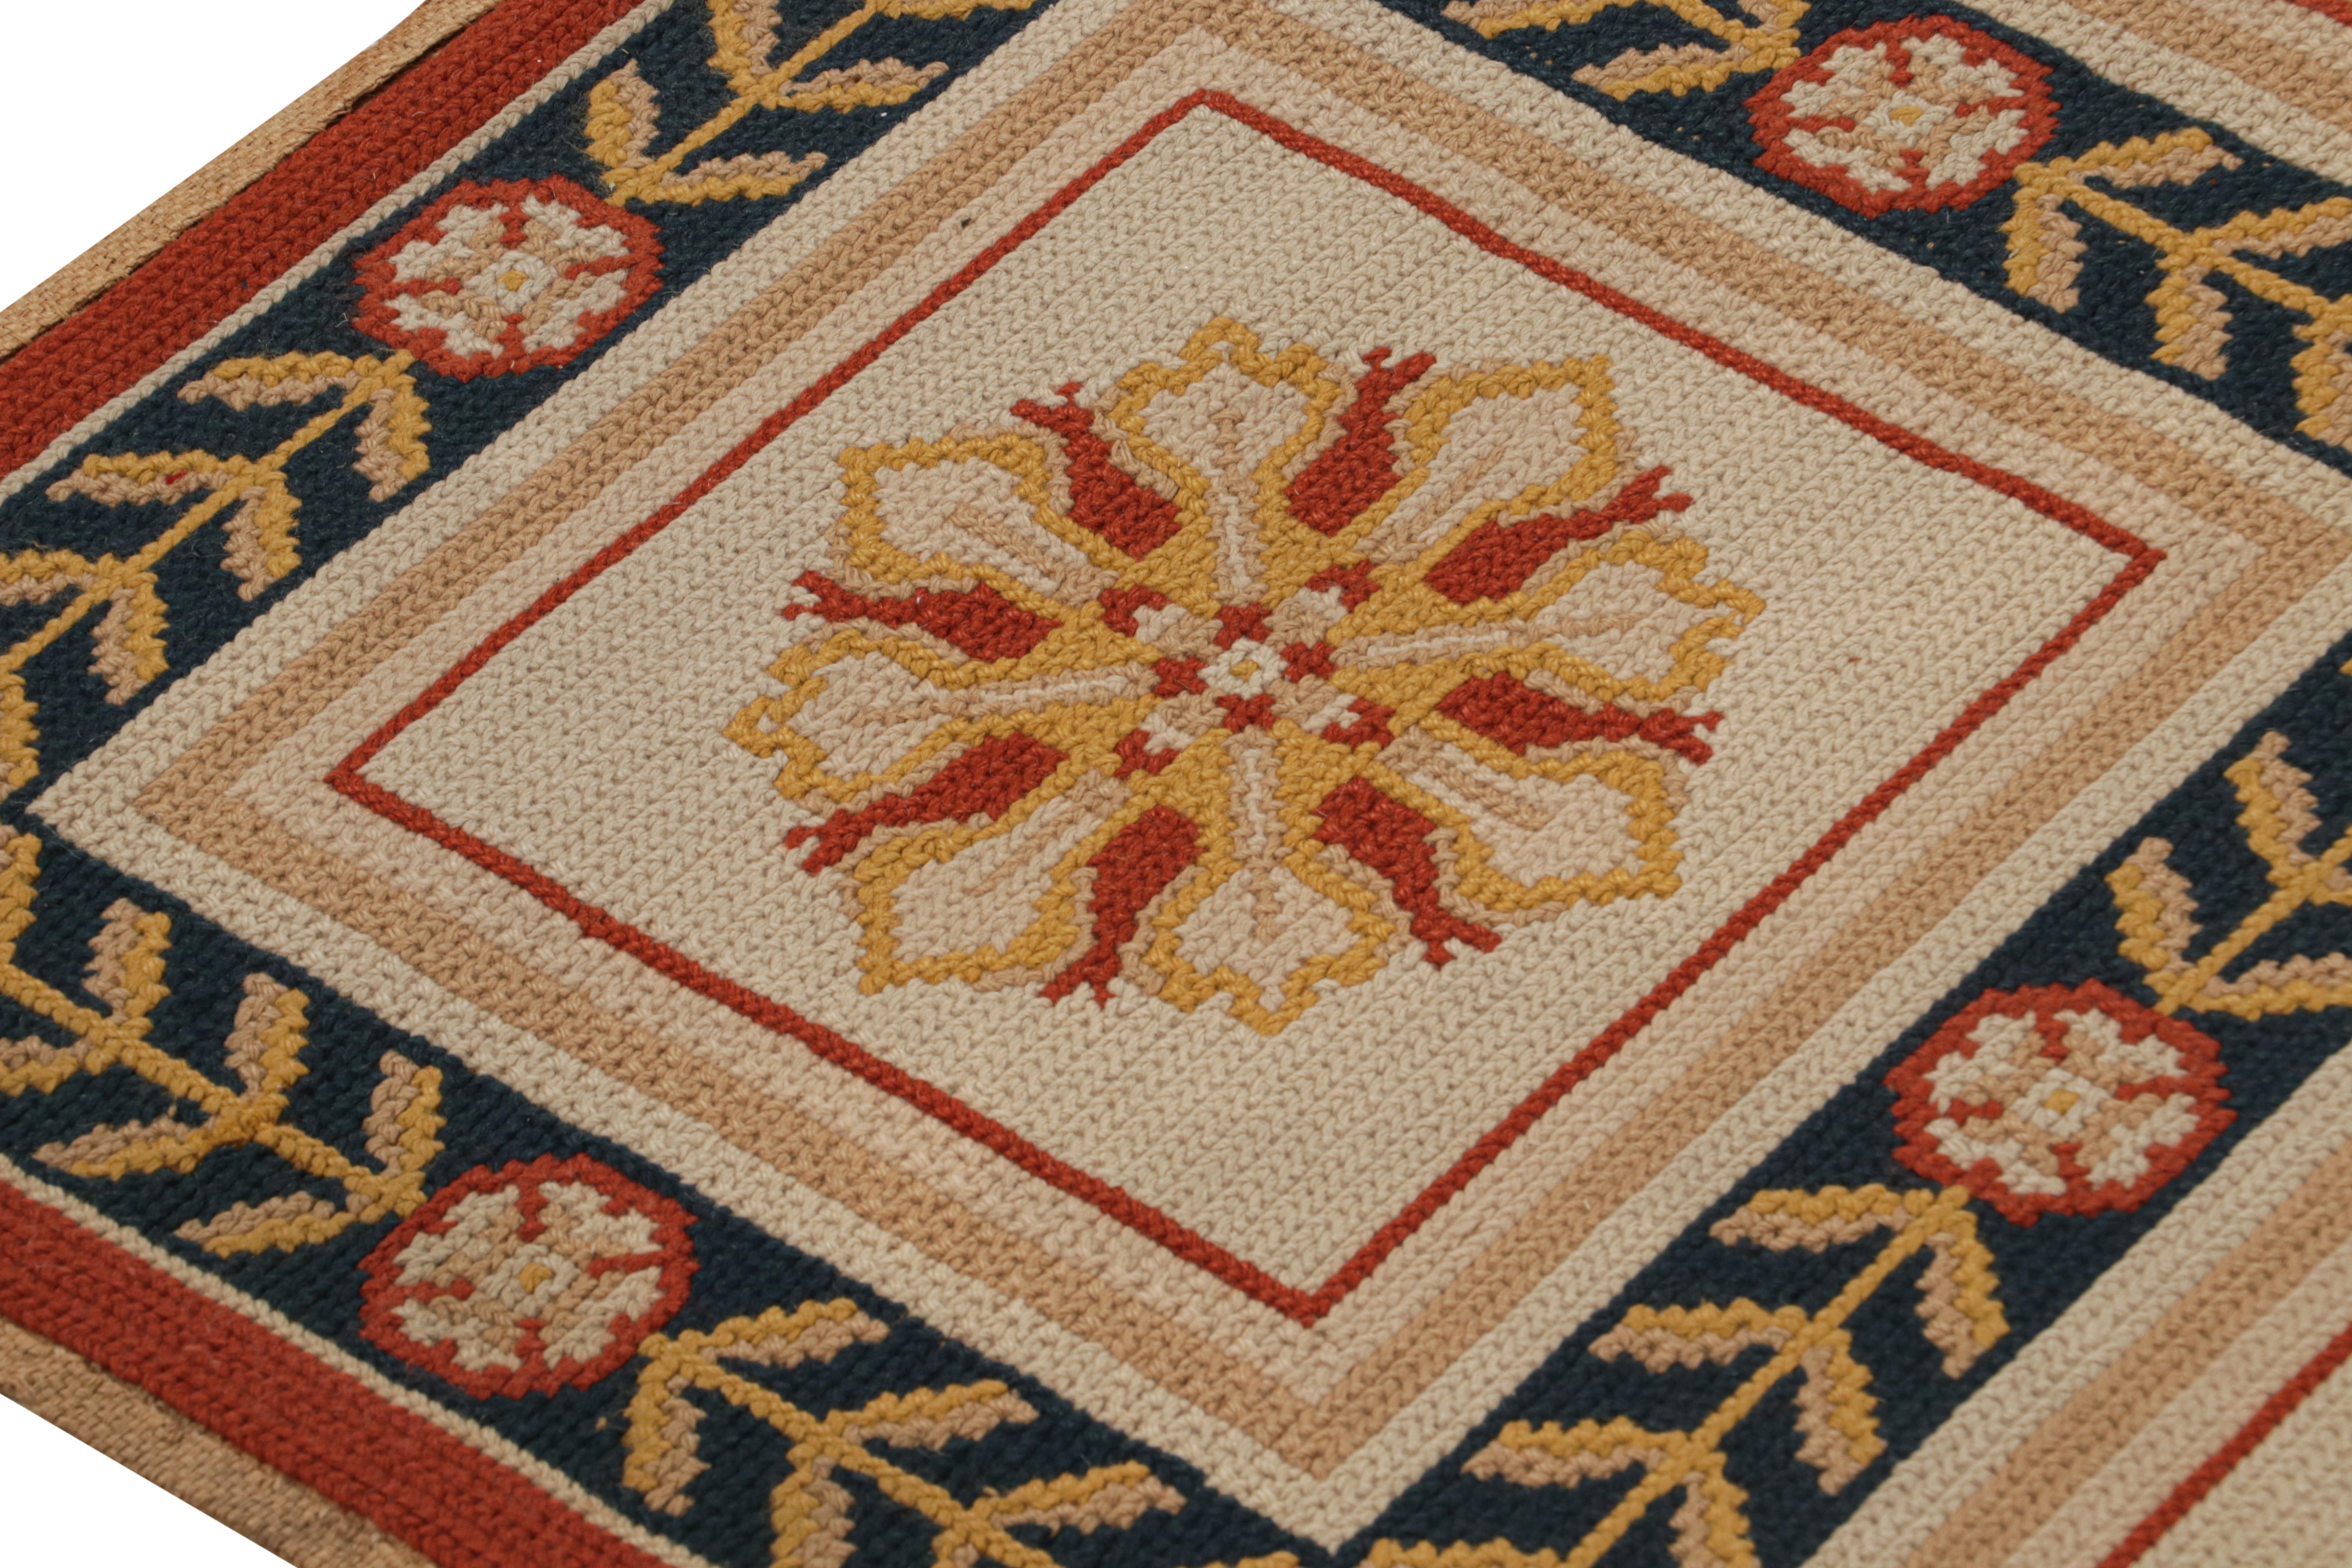 Antique Arraiolos Needlepoint Runner With Floral Medallions, From Rug & Kilim In Good Condition For Sale In Long Island City, NY